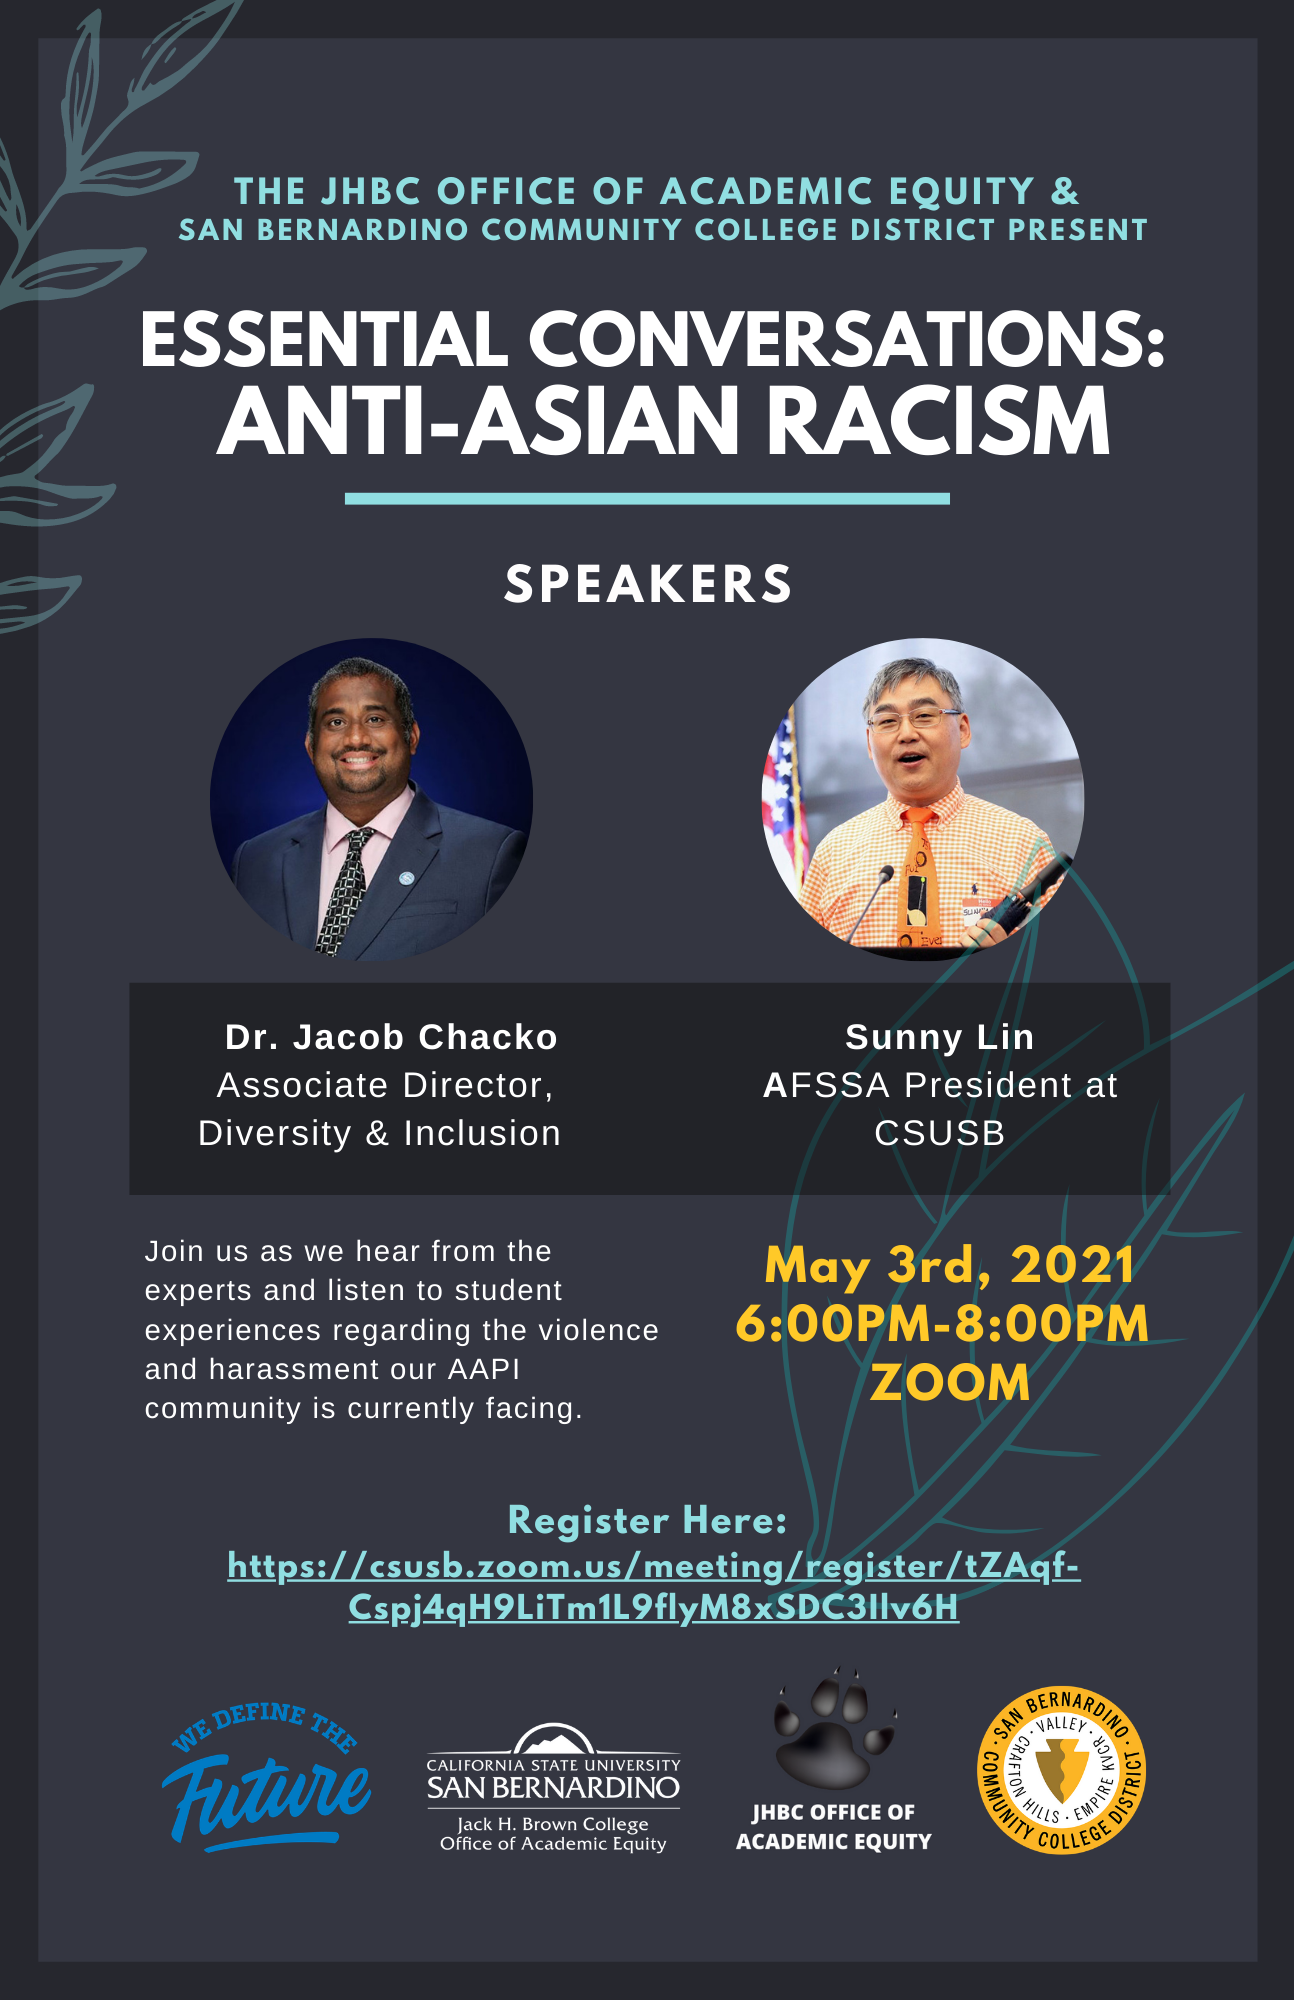 Essential Conversations: Anti-Asian Racism - Dr. Jacob Chacko & Sunny LIn as Speakers. May 3rd, 2021 at 6PM Via Zoom